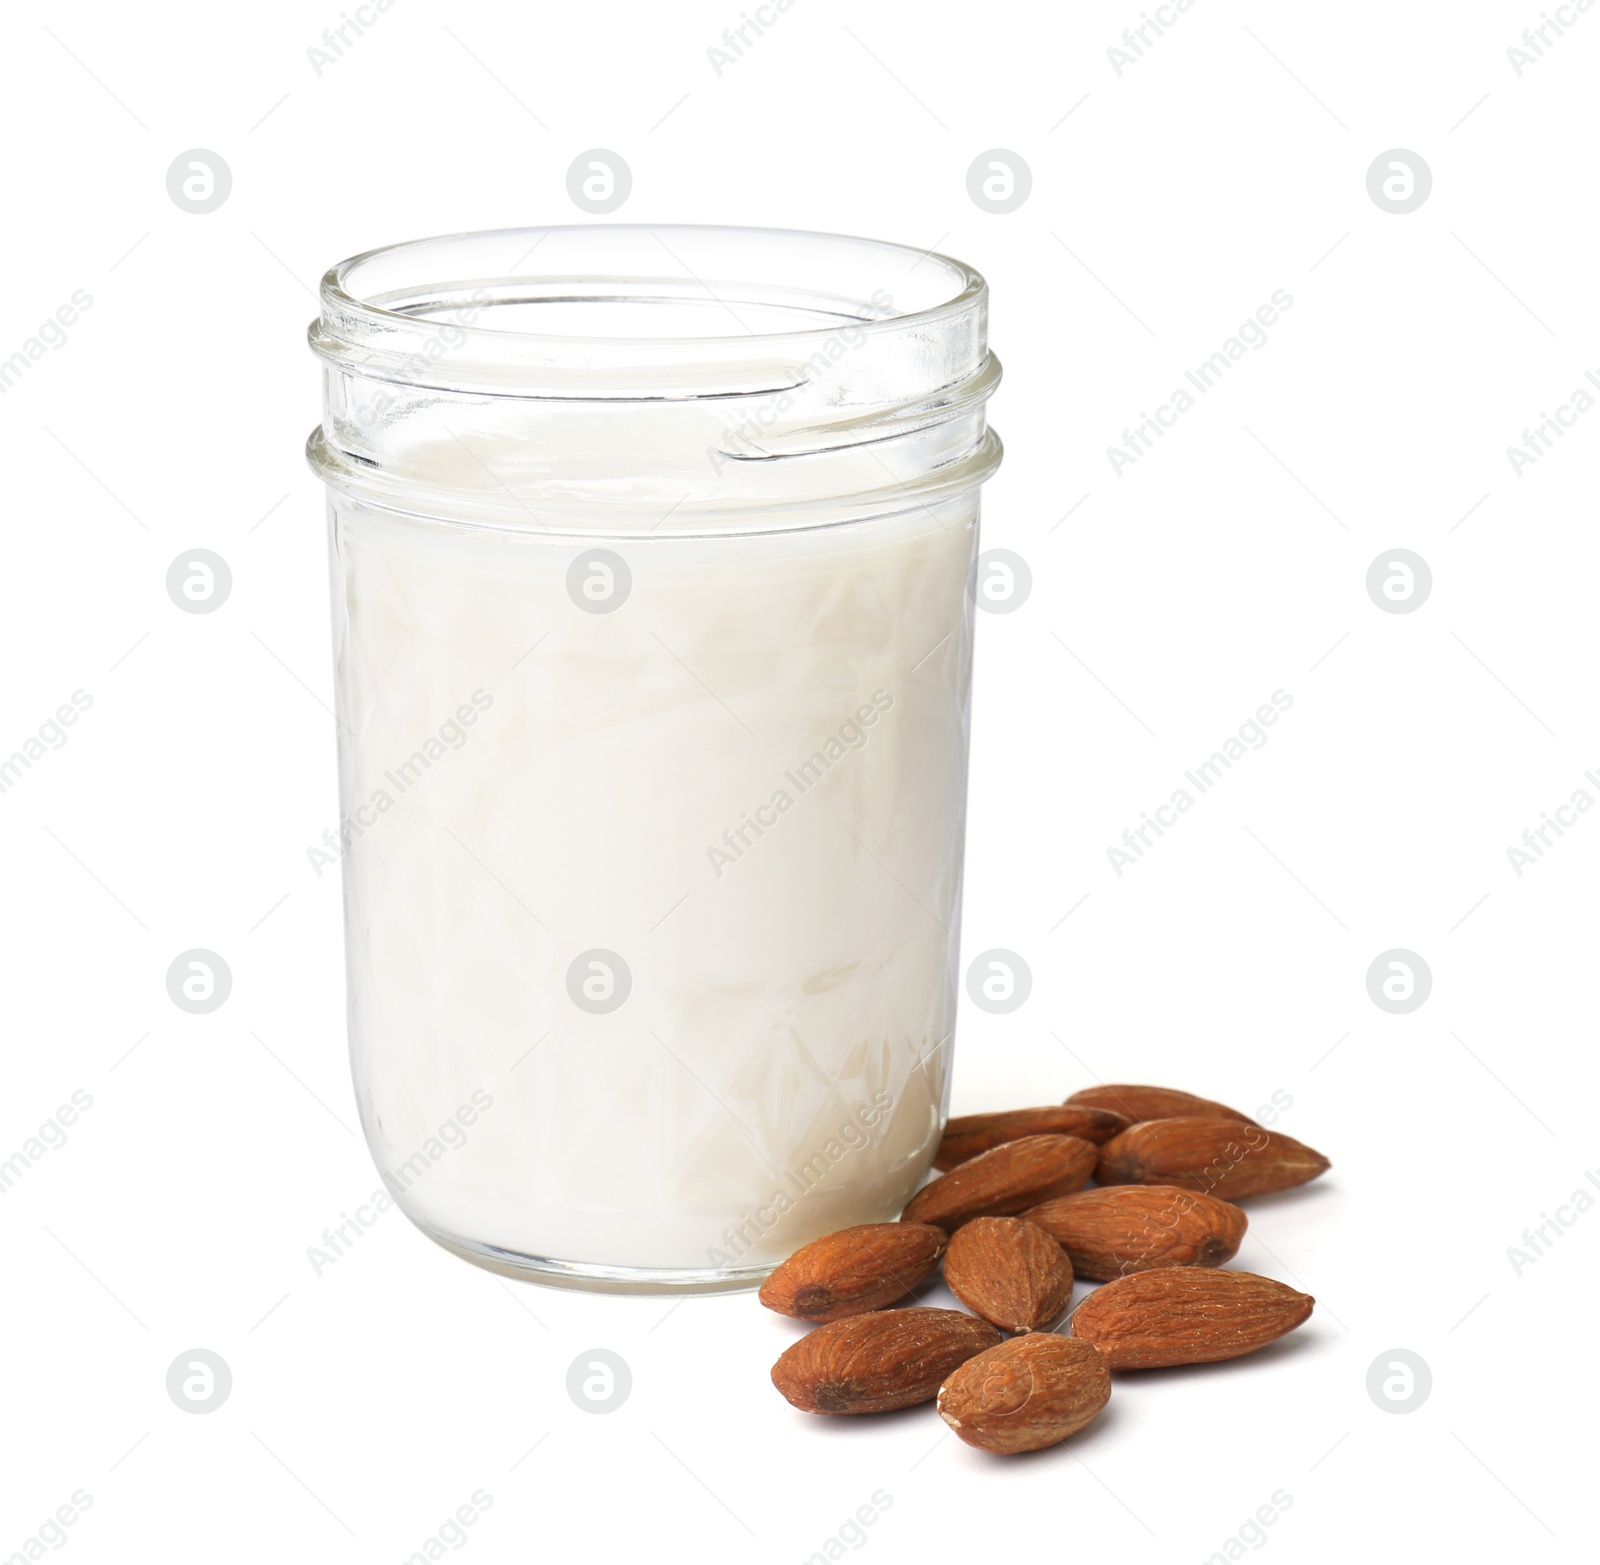 Photo of Jar with almond milk and nuts on white background